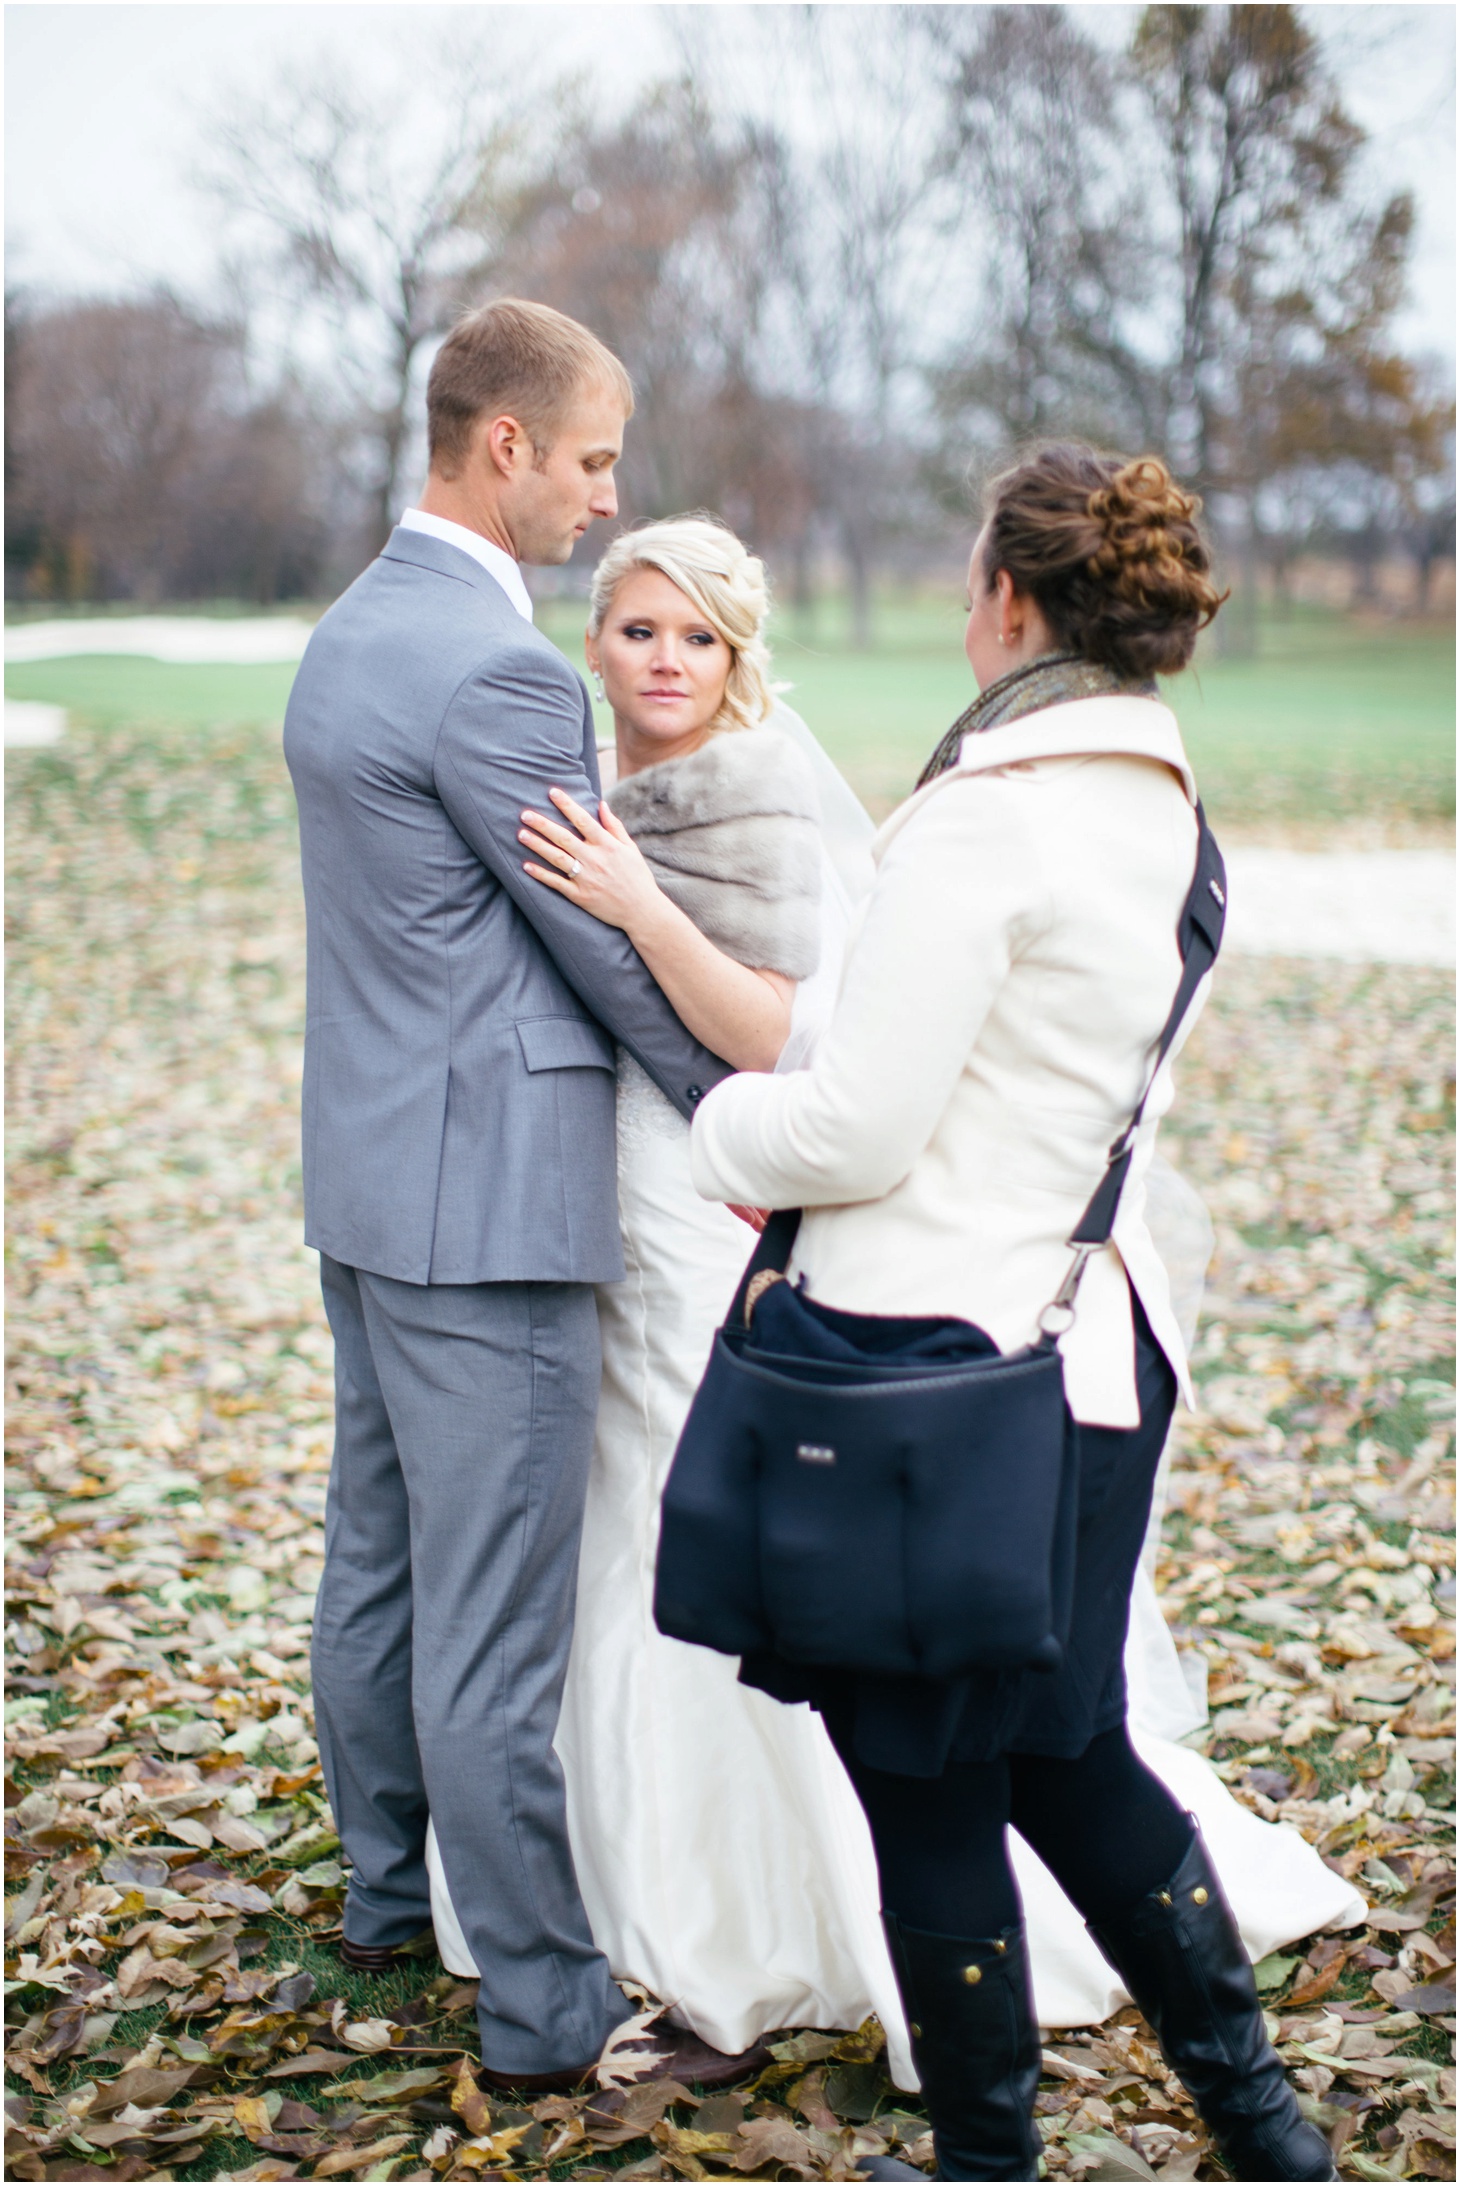 Behind the Scenes in 2014 - Weddings by Sarah Bradshaw Photography_0145